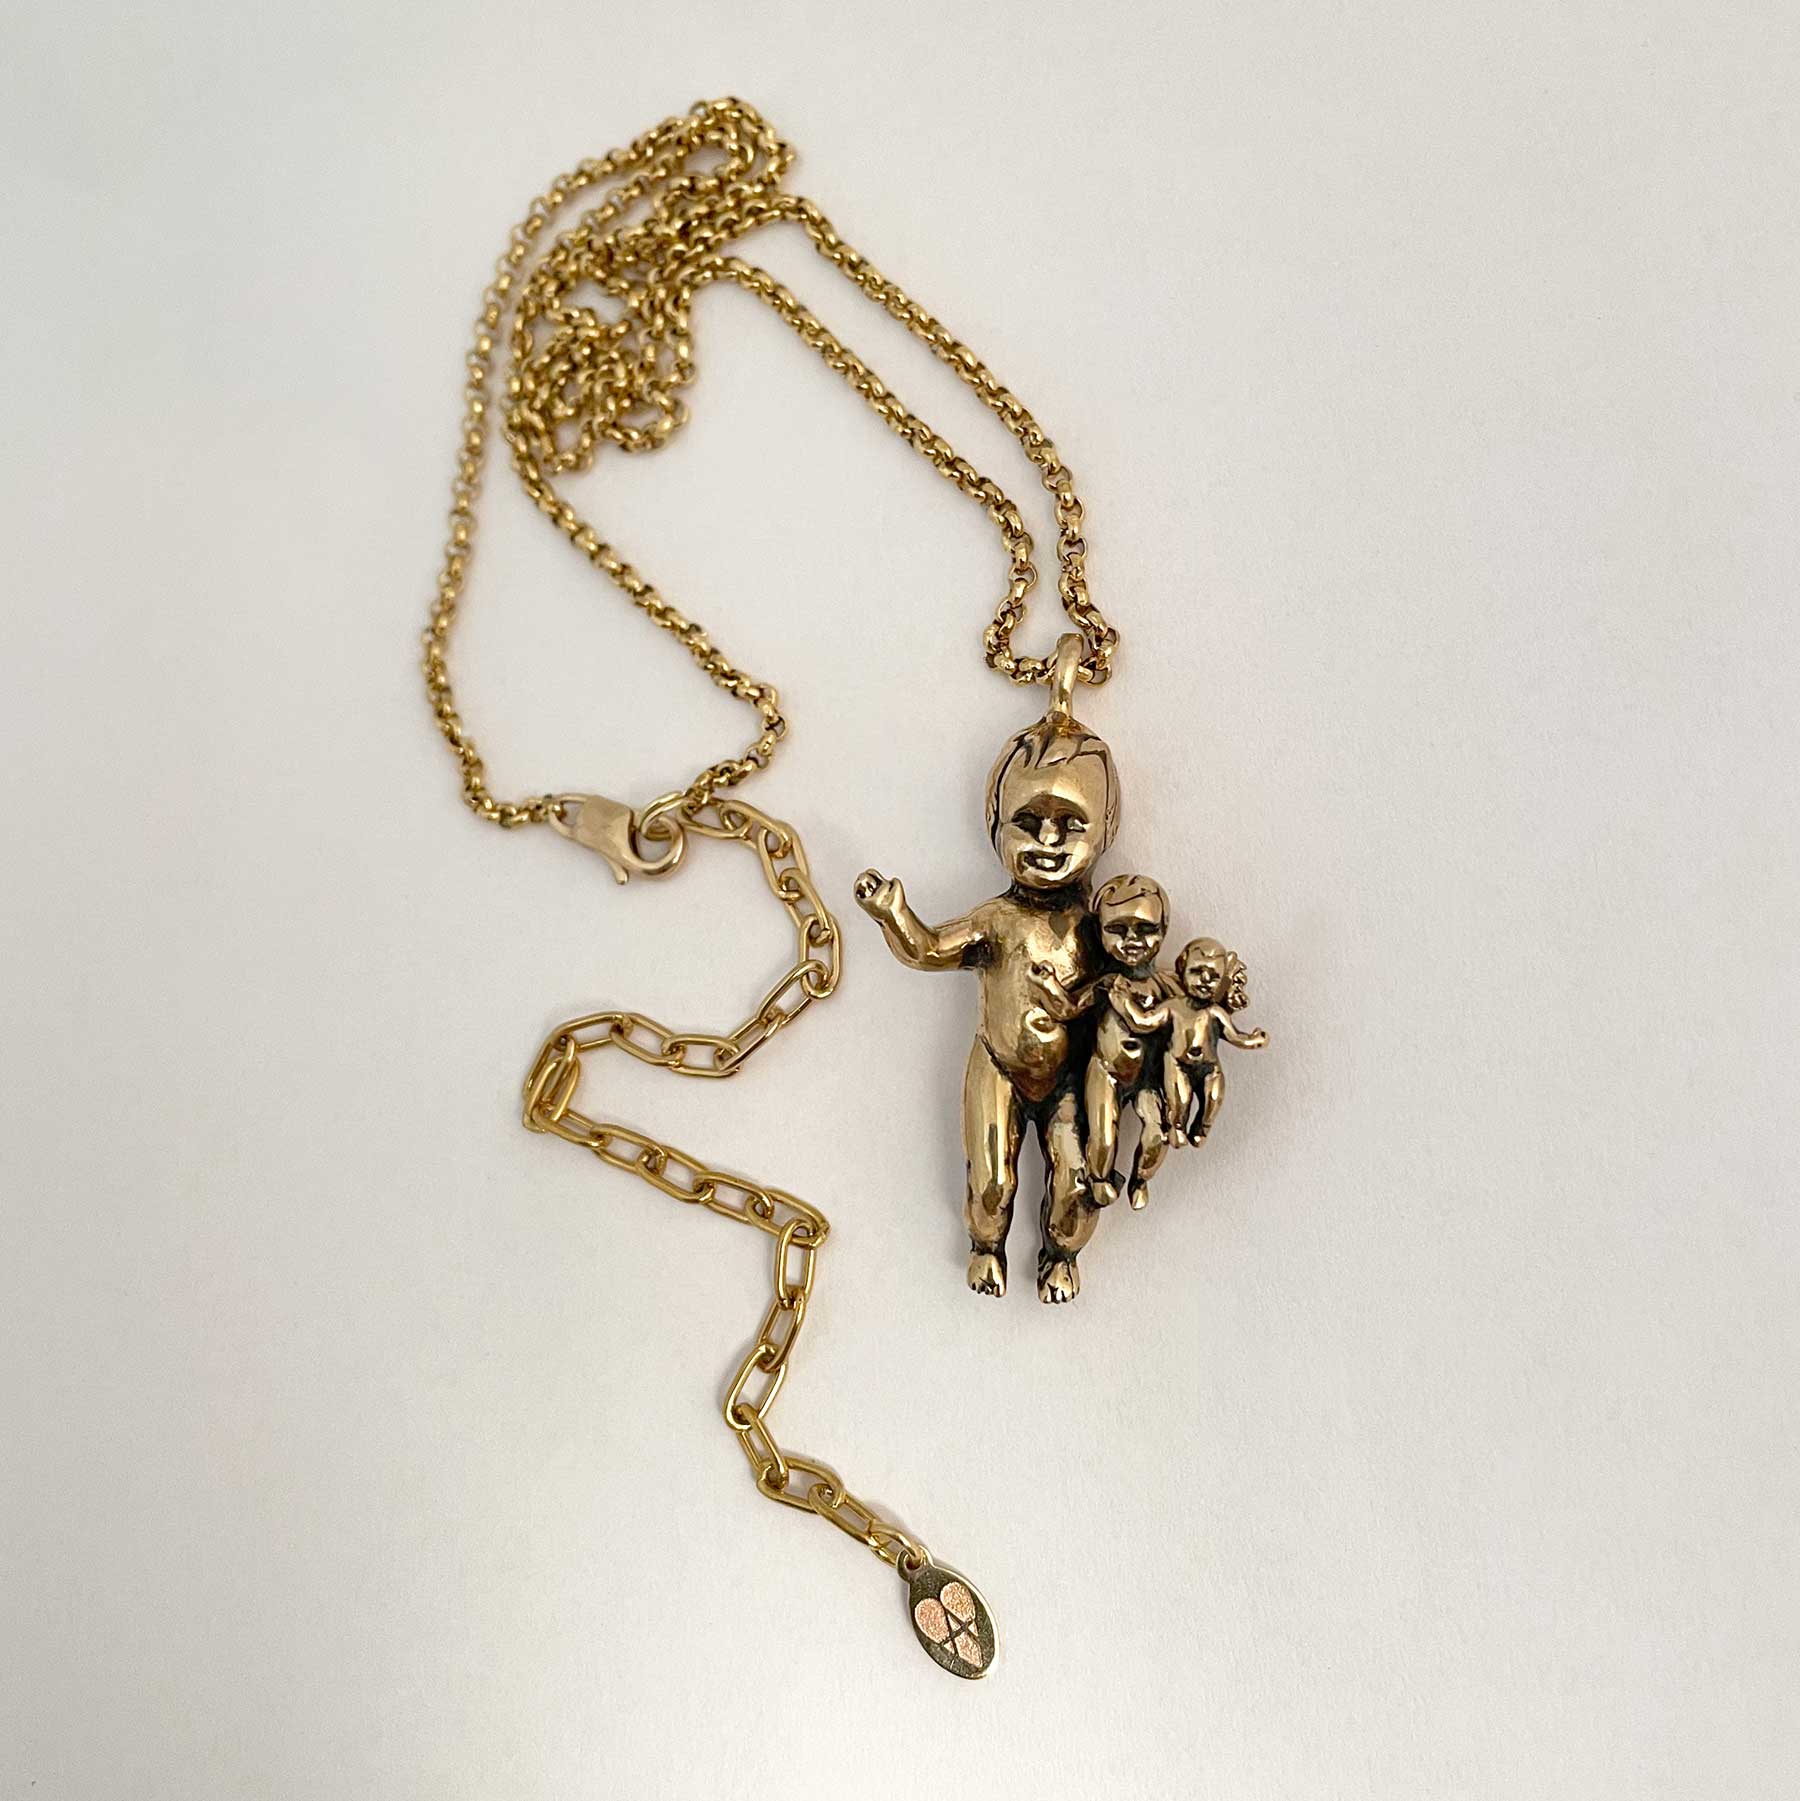 unique creepy cute peculiar 3 babies necklace size descending order gold - Anomaly jewelry